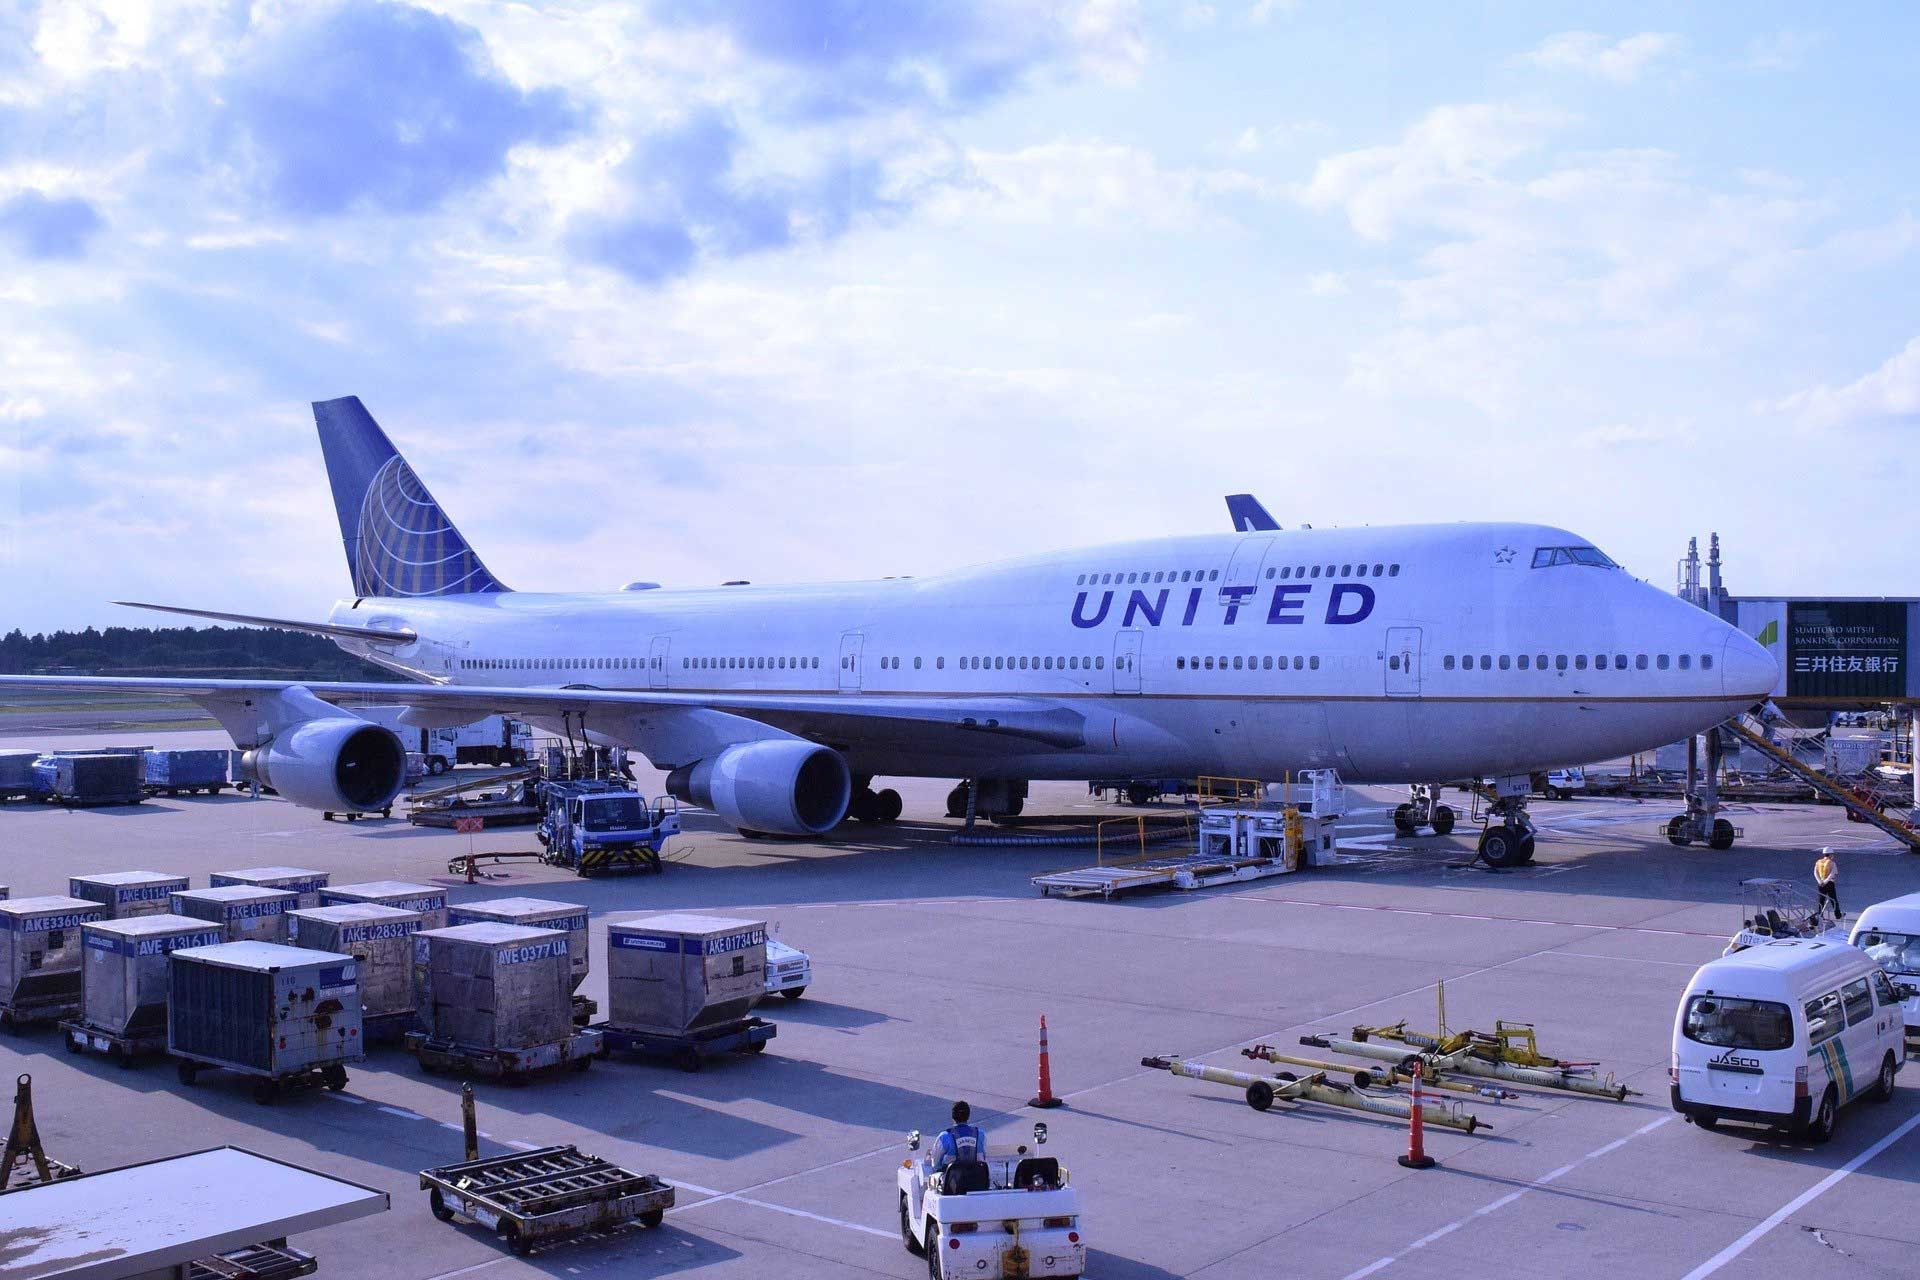 Chase-renews-united-airlines-credit-card-partnership-through-2029